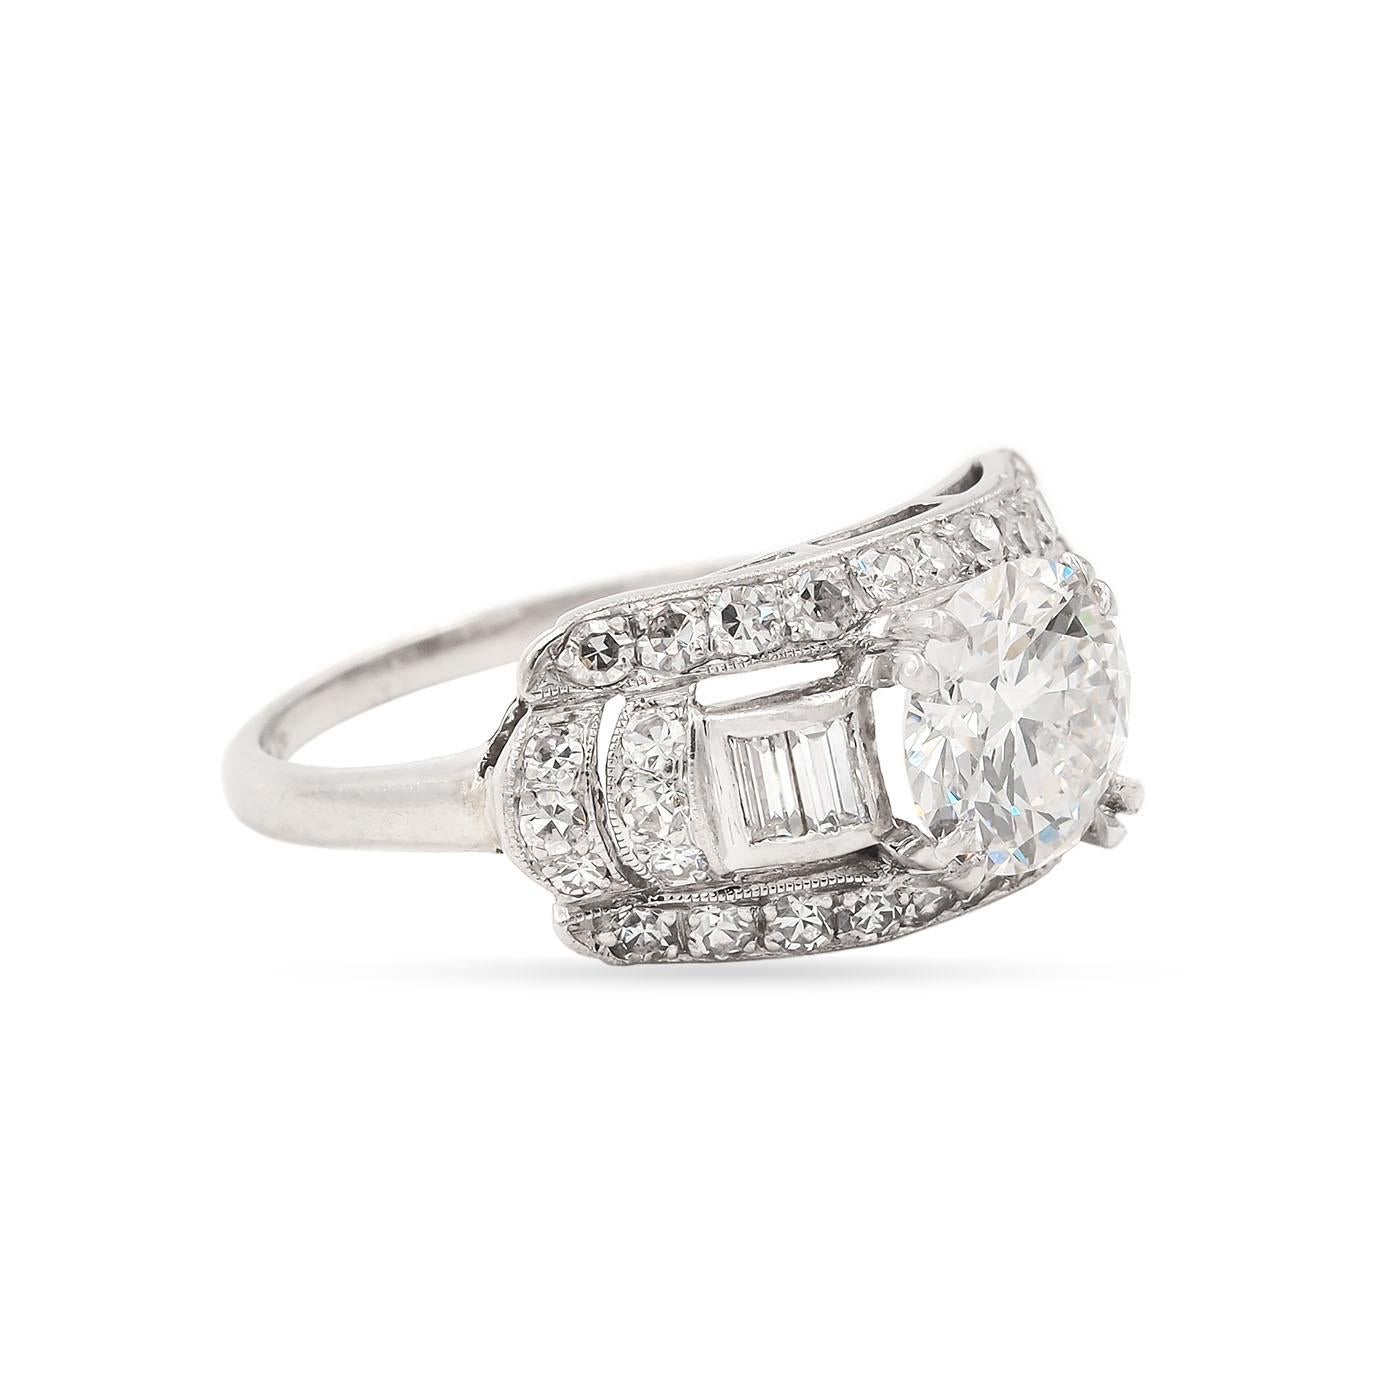 Late Art Deco era 1.44 Carat Transitional (Early Round Brilliant) Cut Diamond Engagement Ring composed of platinum. With a 1.44 Carat Transitional Cut diamond center, GIA certified H color & VVS2 clarity. With an additional 38 diamonds, a mix of